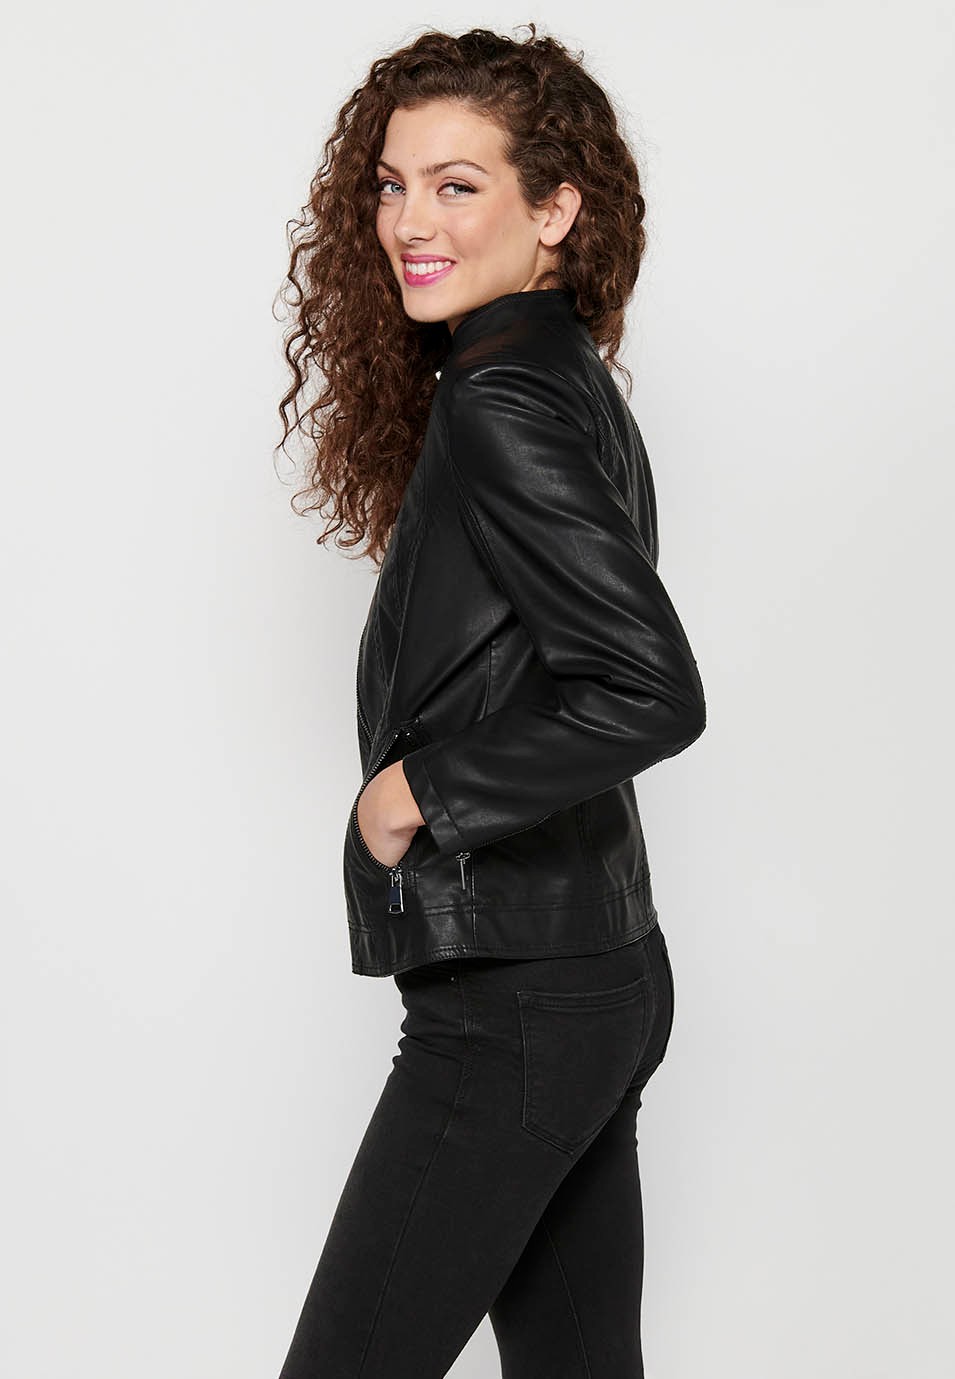 Long Sleeve Jacket with Round High Neck and Front Zipper Closure in Black for Women 2